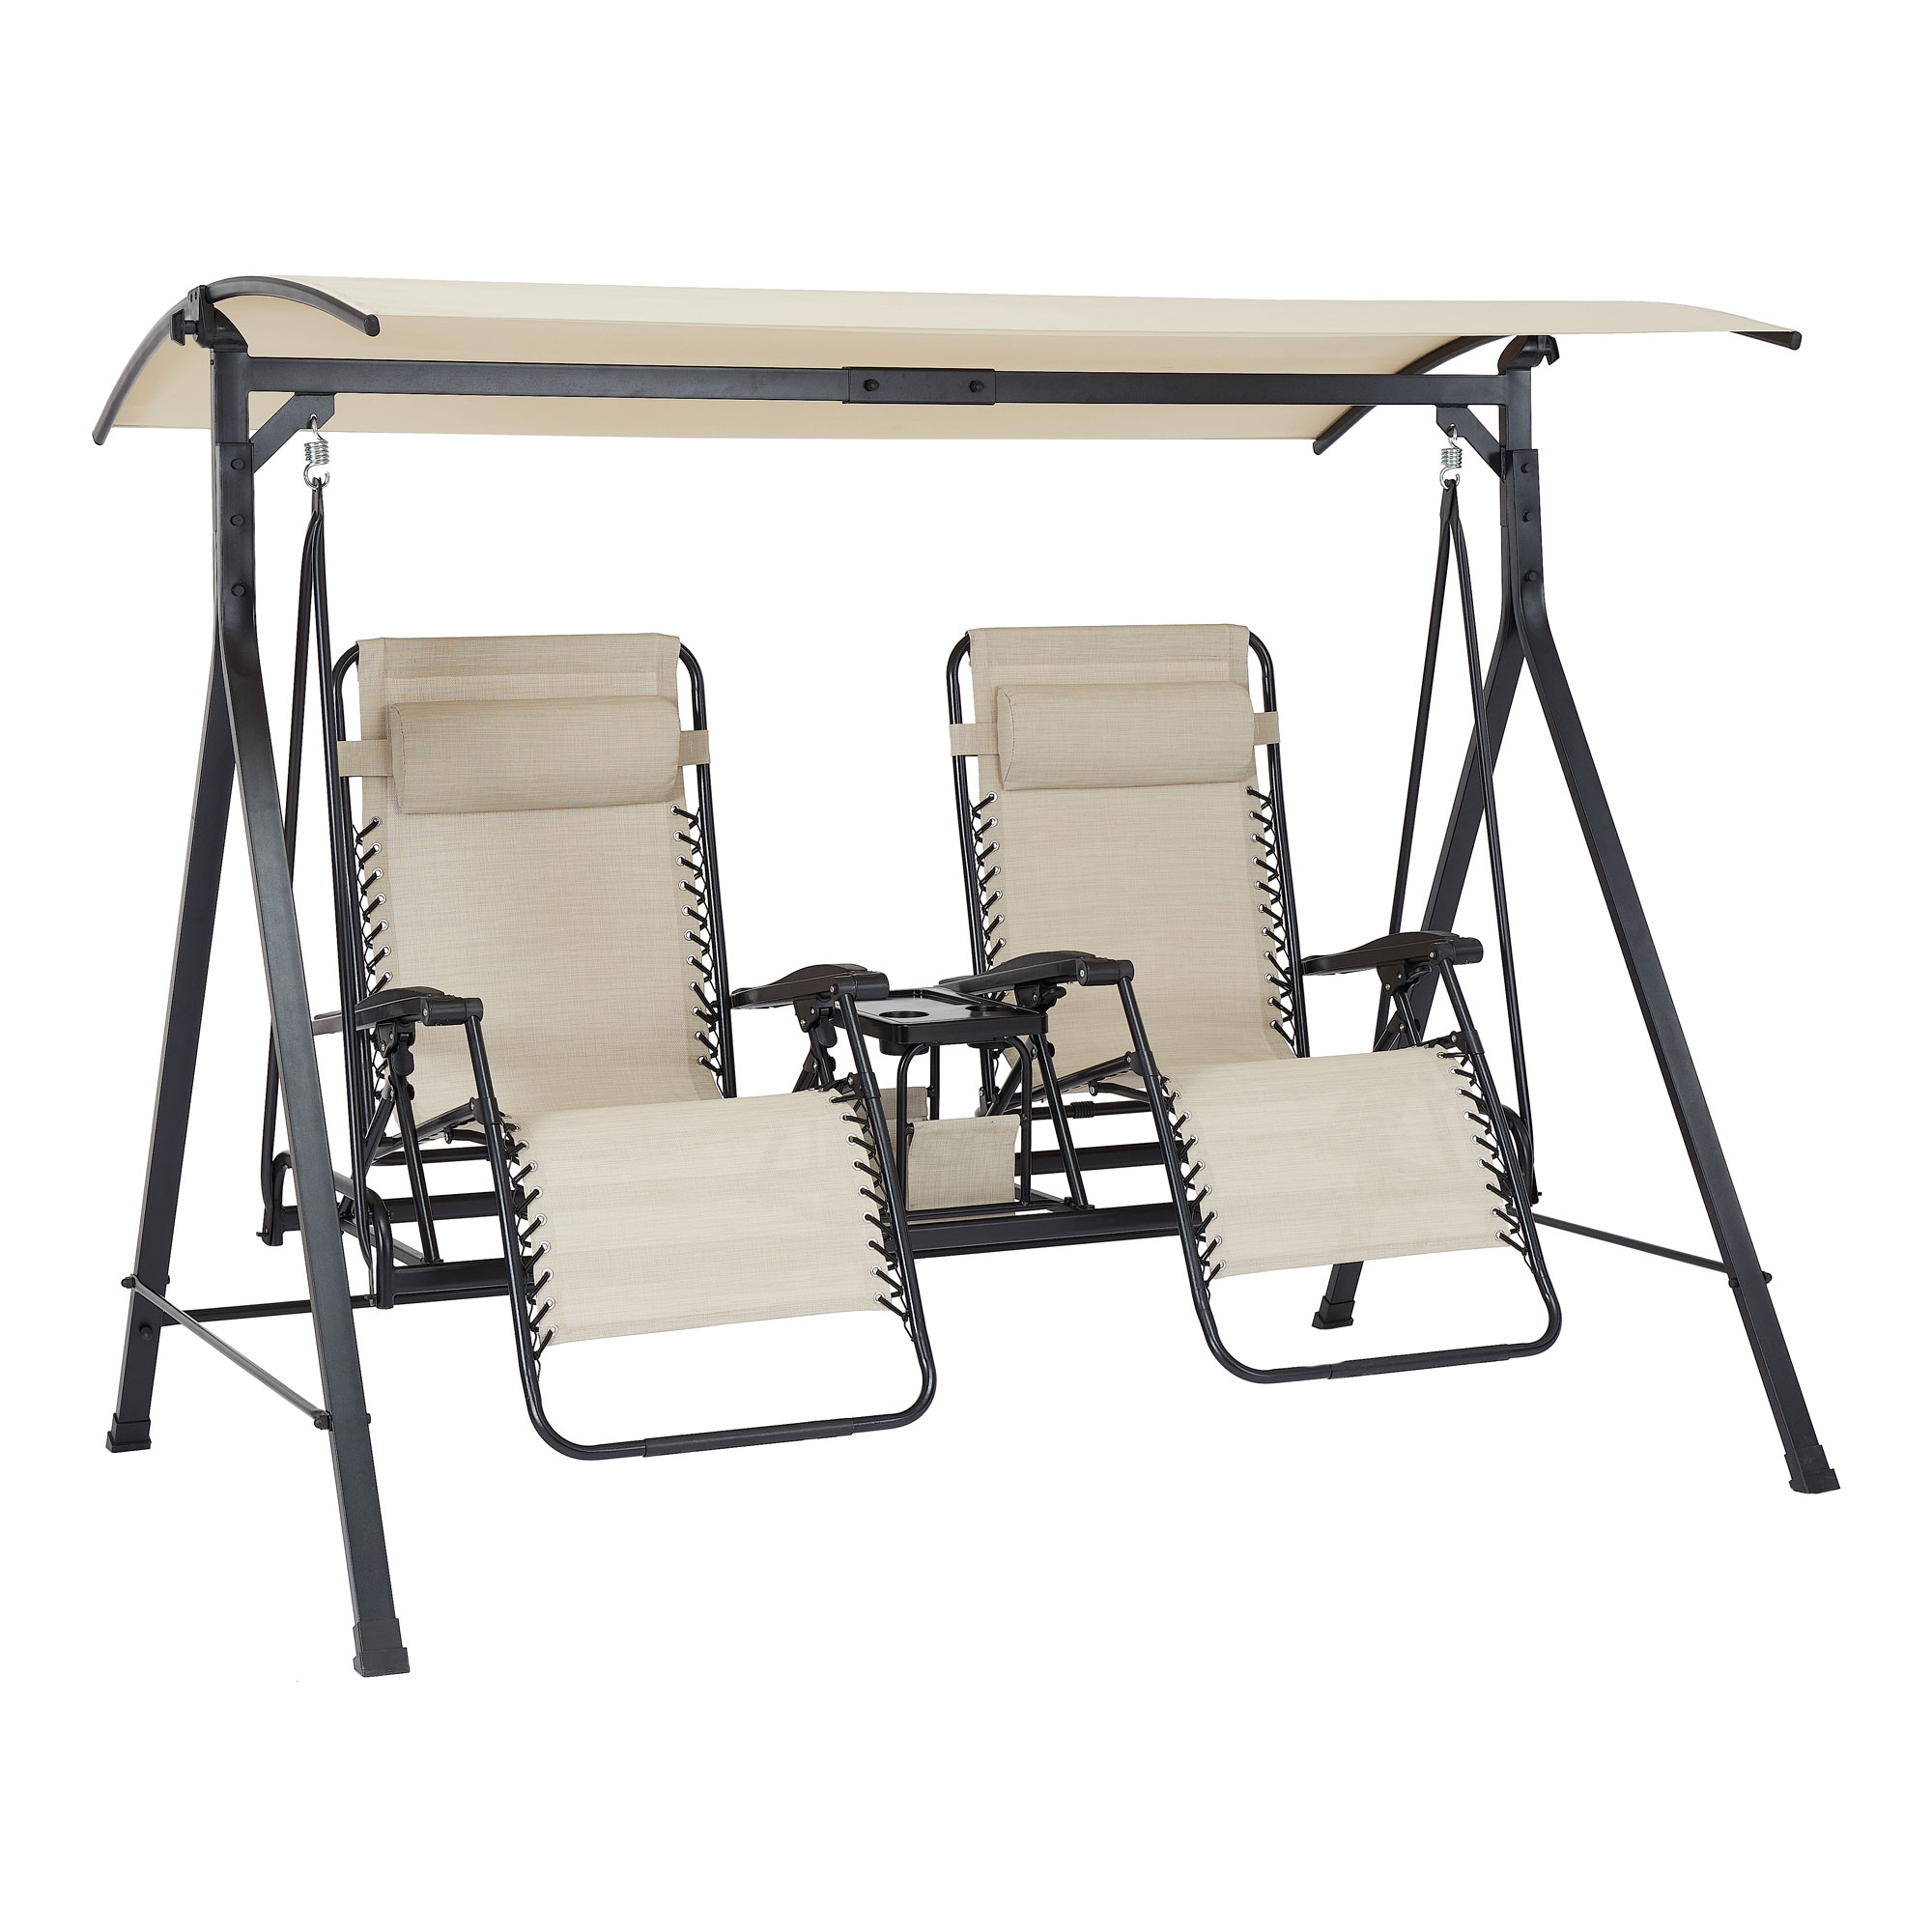 Mainstays 2-Seat Reclining Oversized Zero-Gravity Swing with Canopy and Center Storage Console, Beige/Black - image 1 of 9